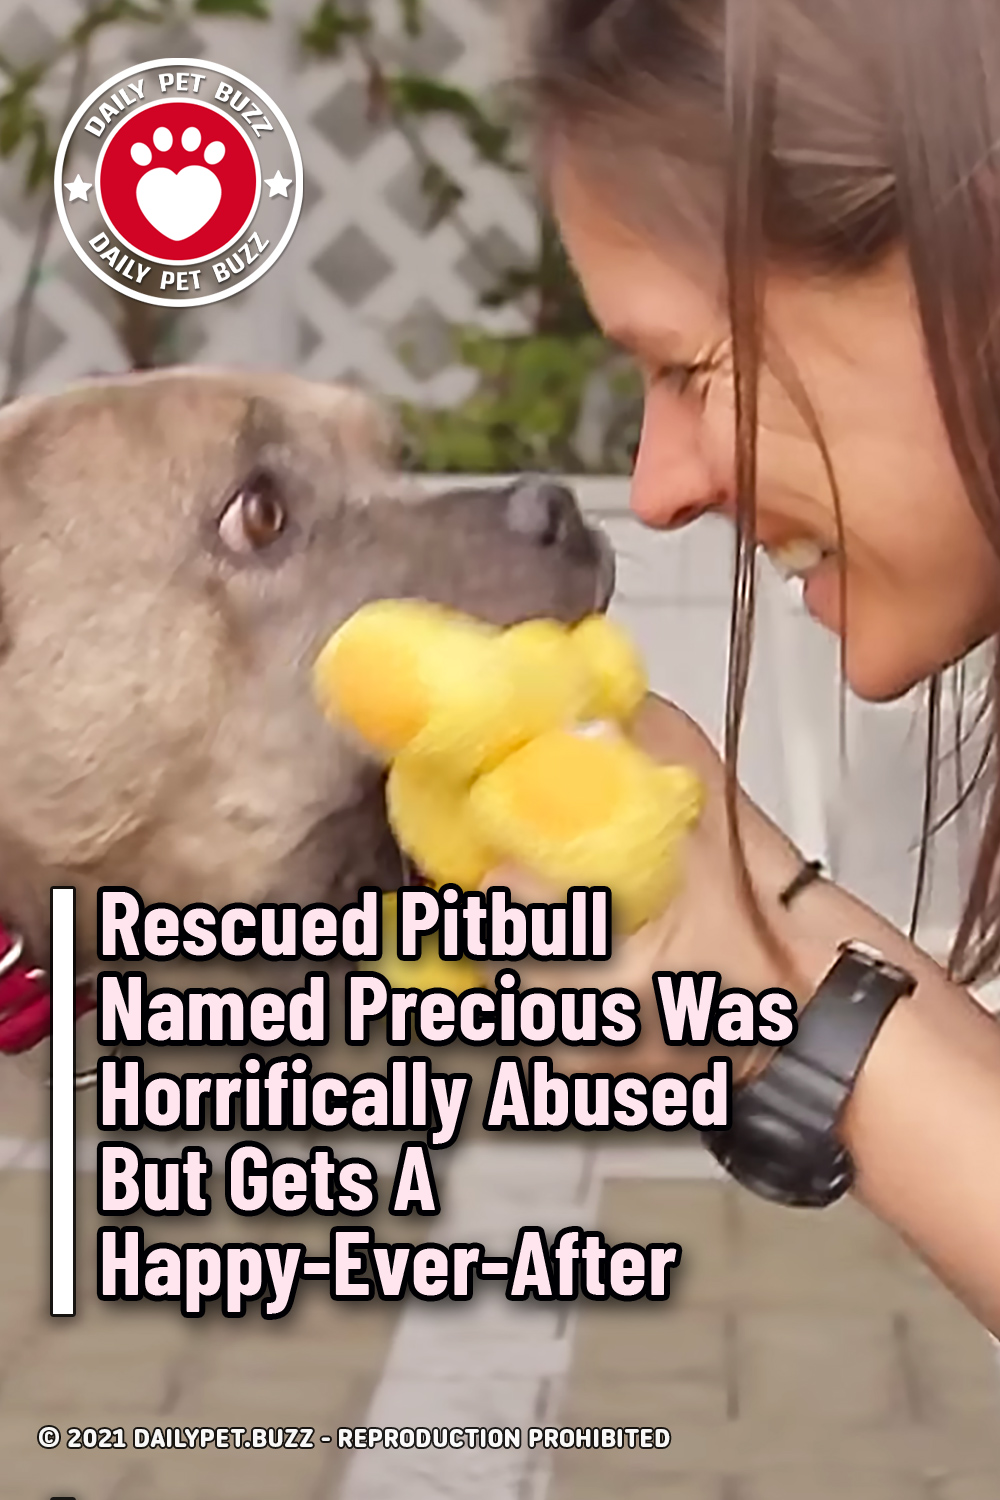 Rescued Pitbull Named Precious Was Horrifically Abused But Gets A Happy-Ever-After